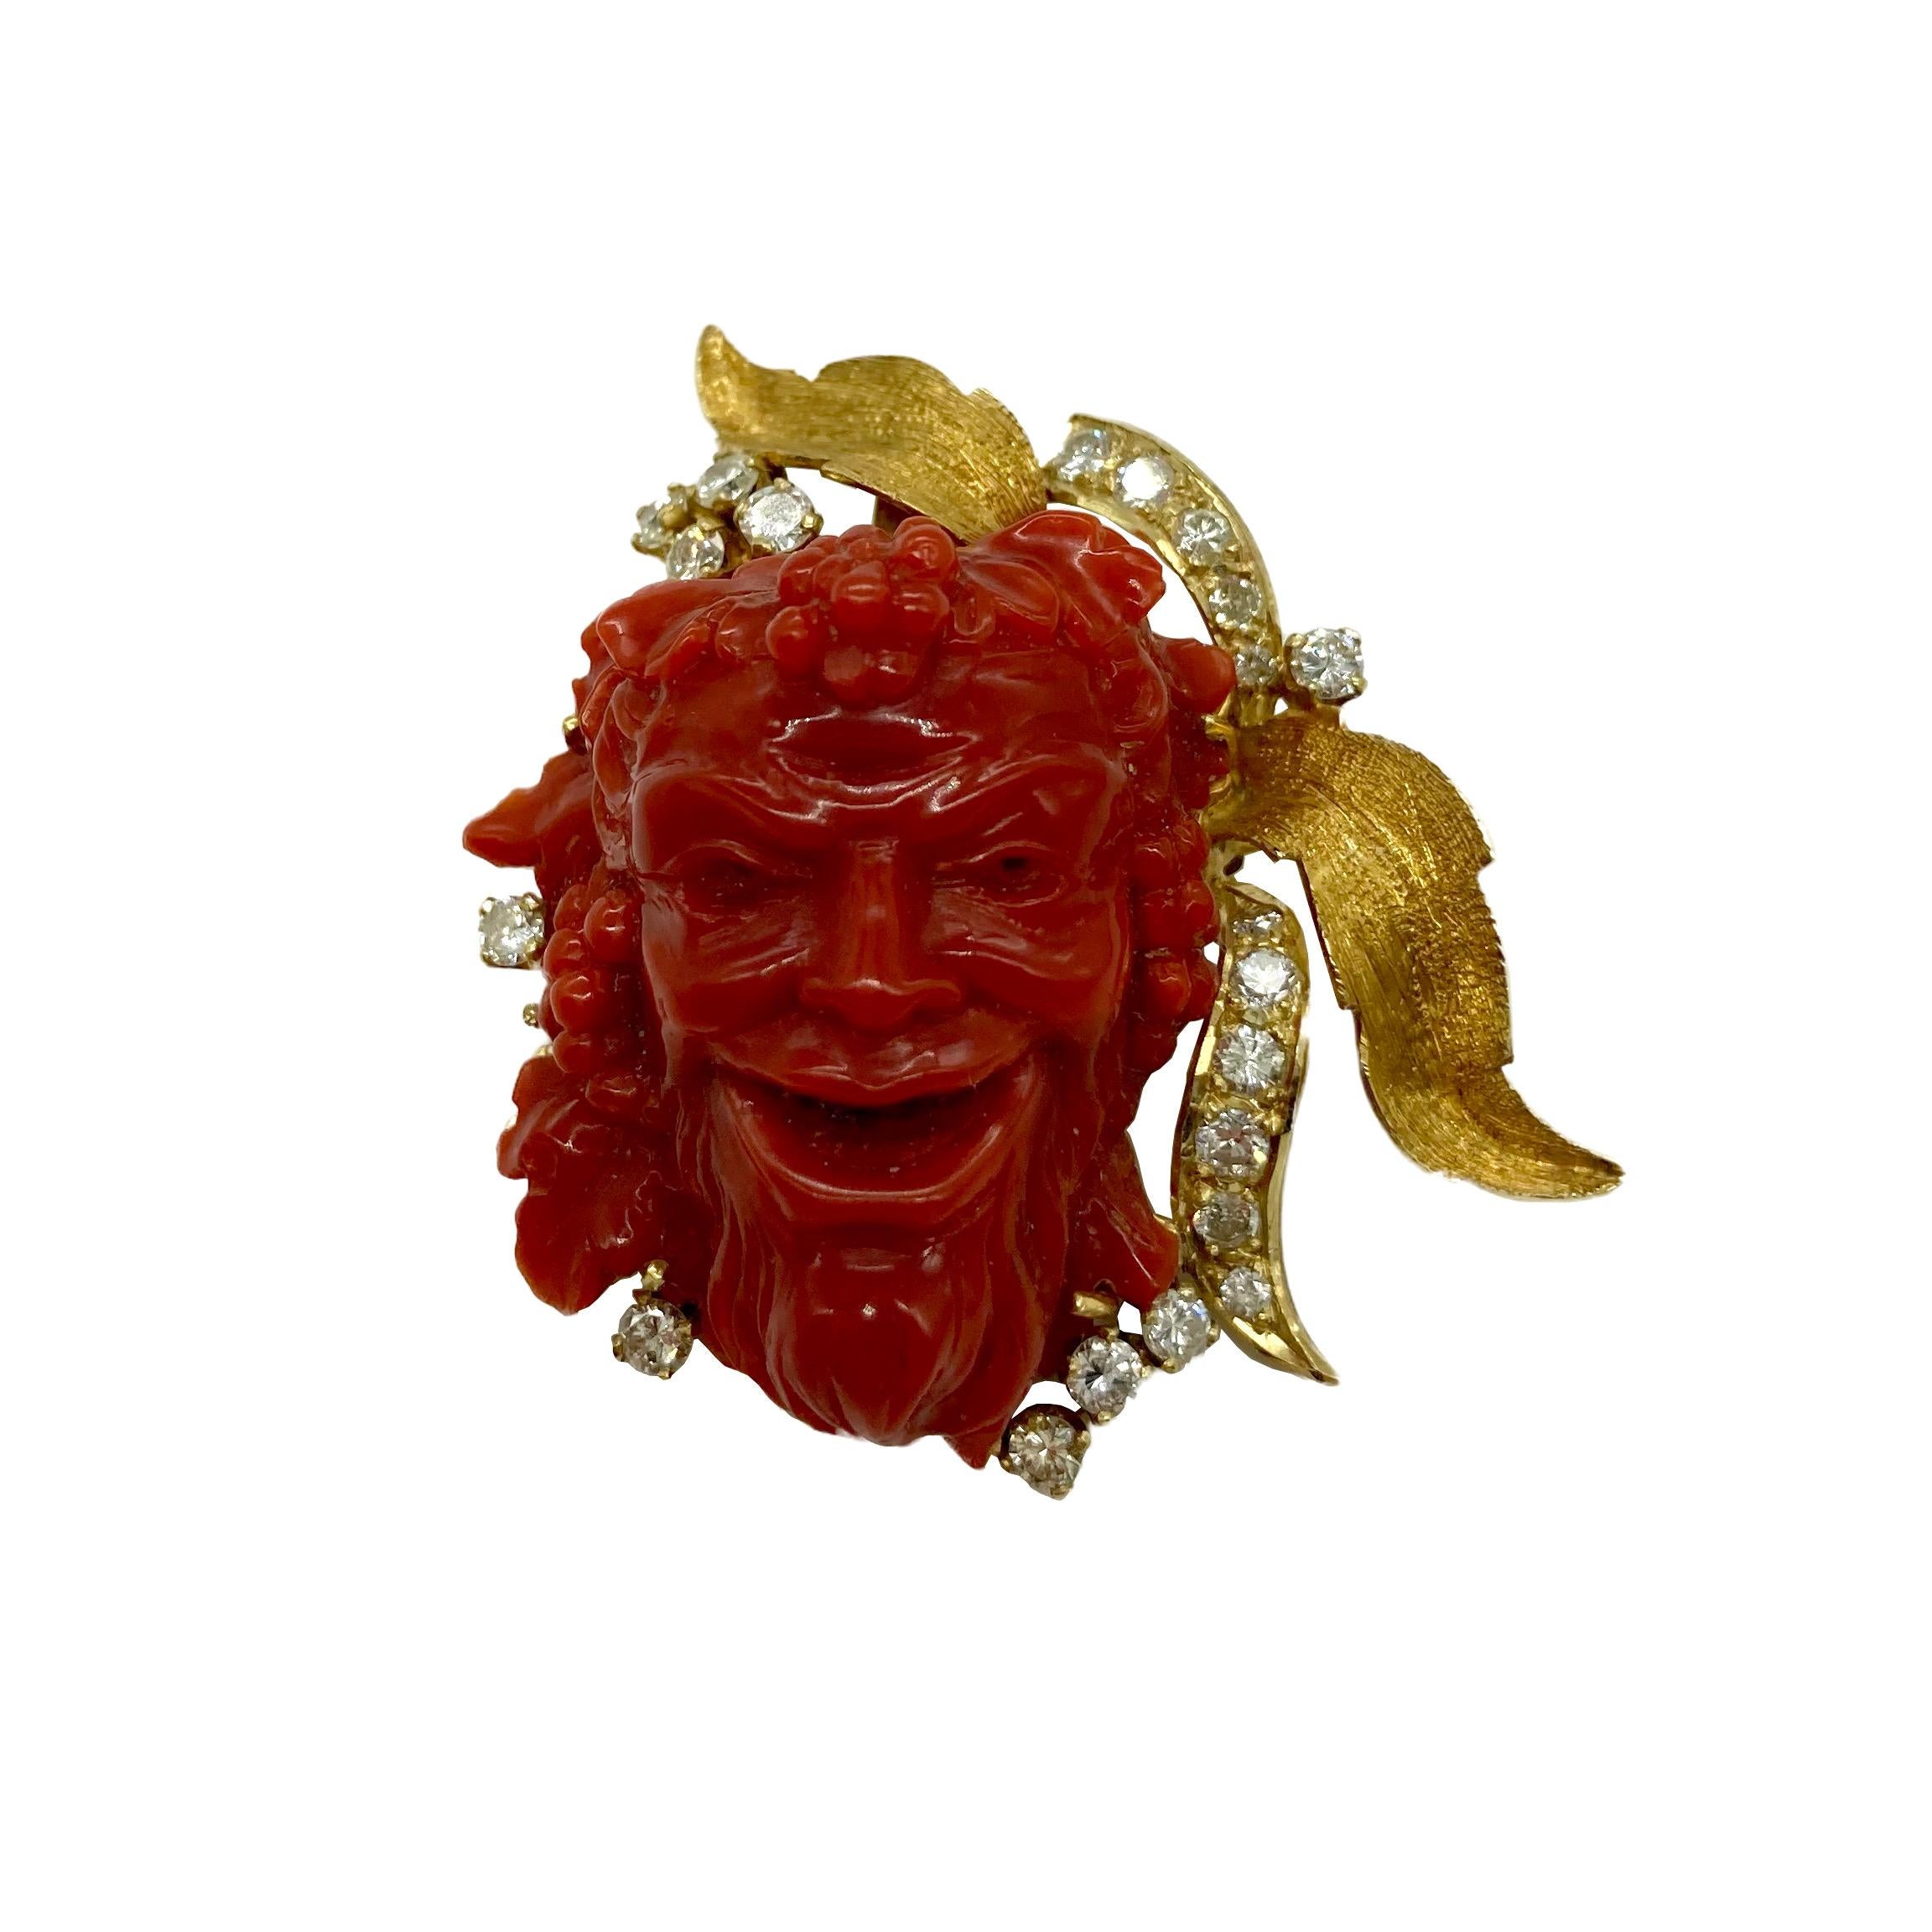 Brilliant Cut Carved Red Italian Coral and Diamond Bacchus Brooch-Pendant